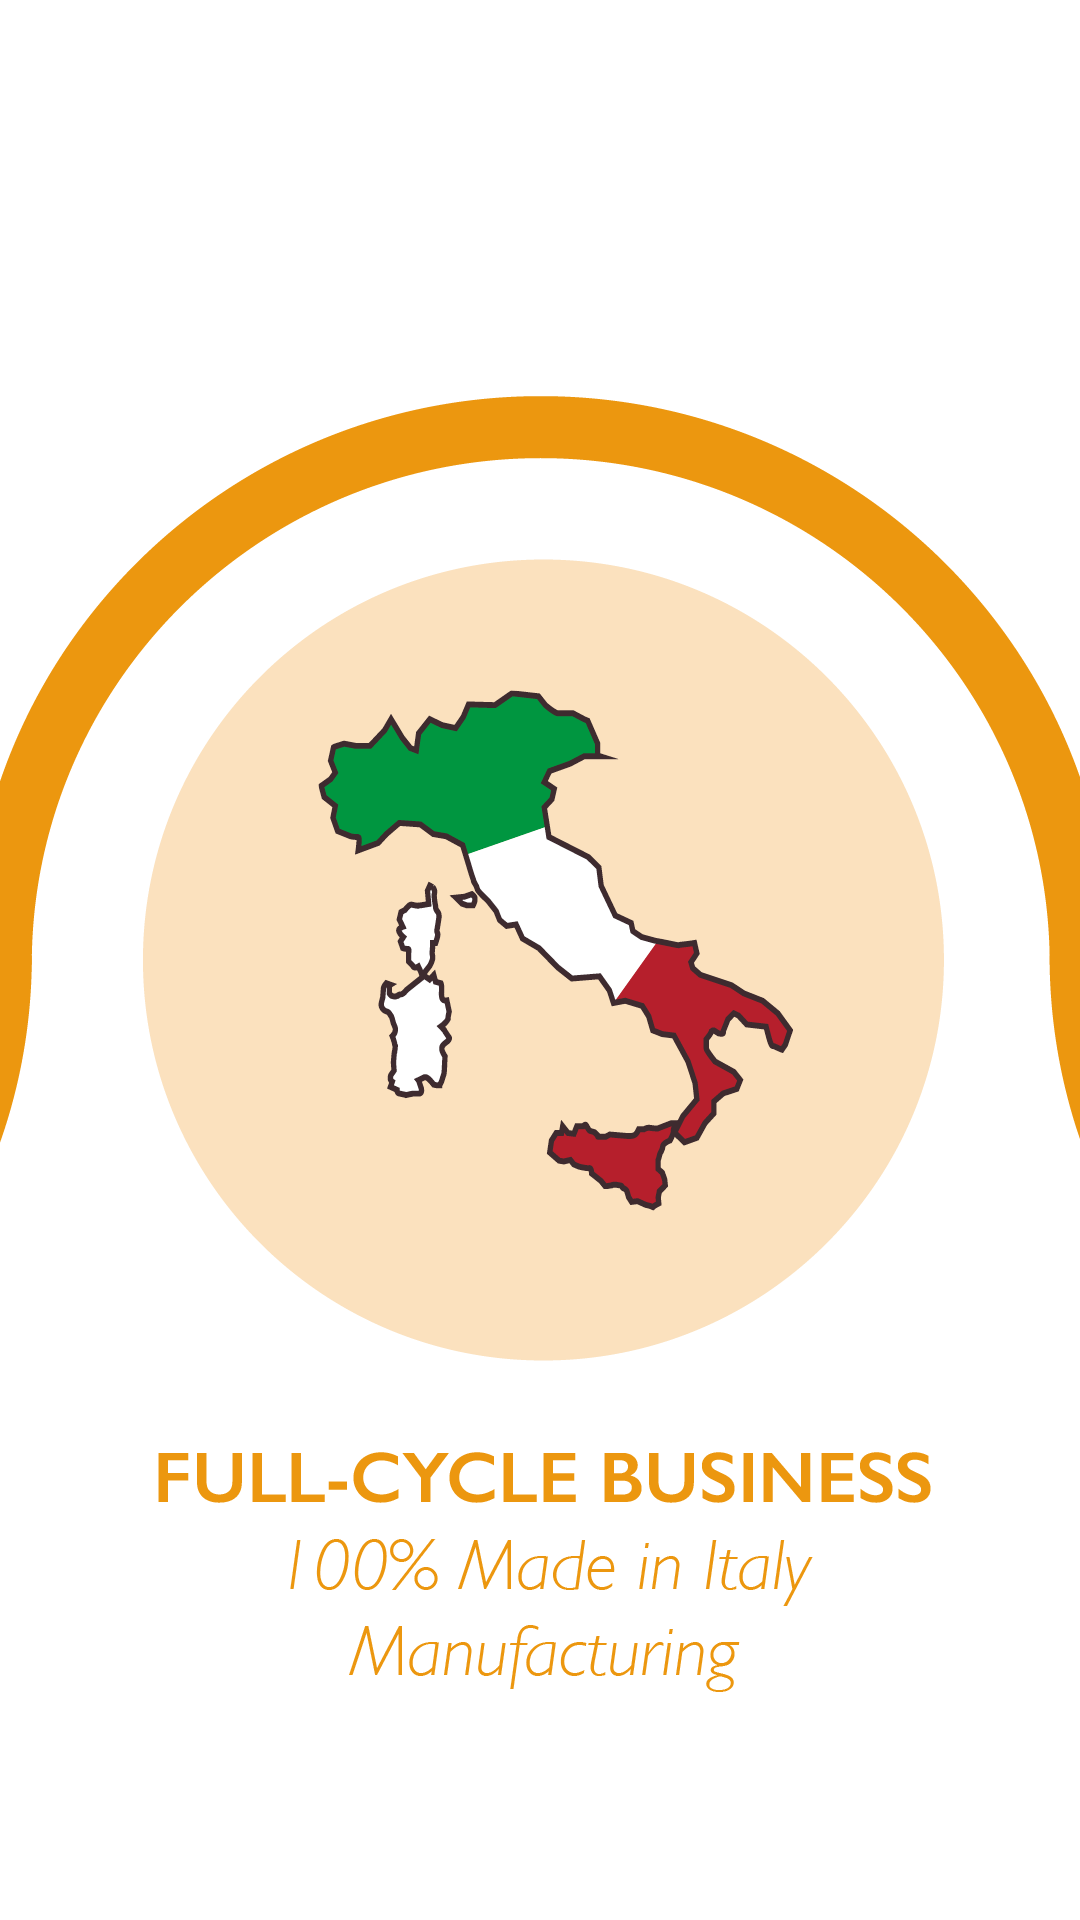 FULL-CYCLE BUSINESS - 100% Made in Italy Manufacturing